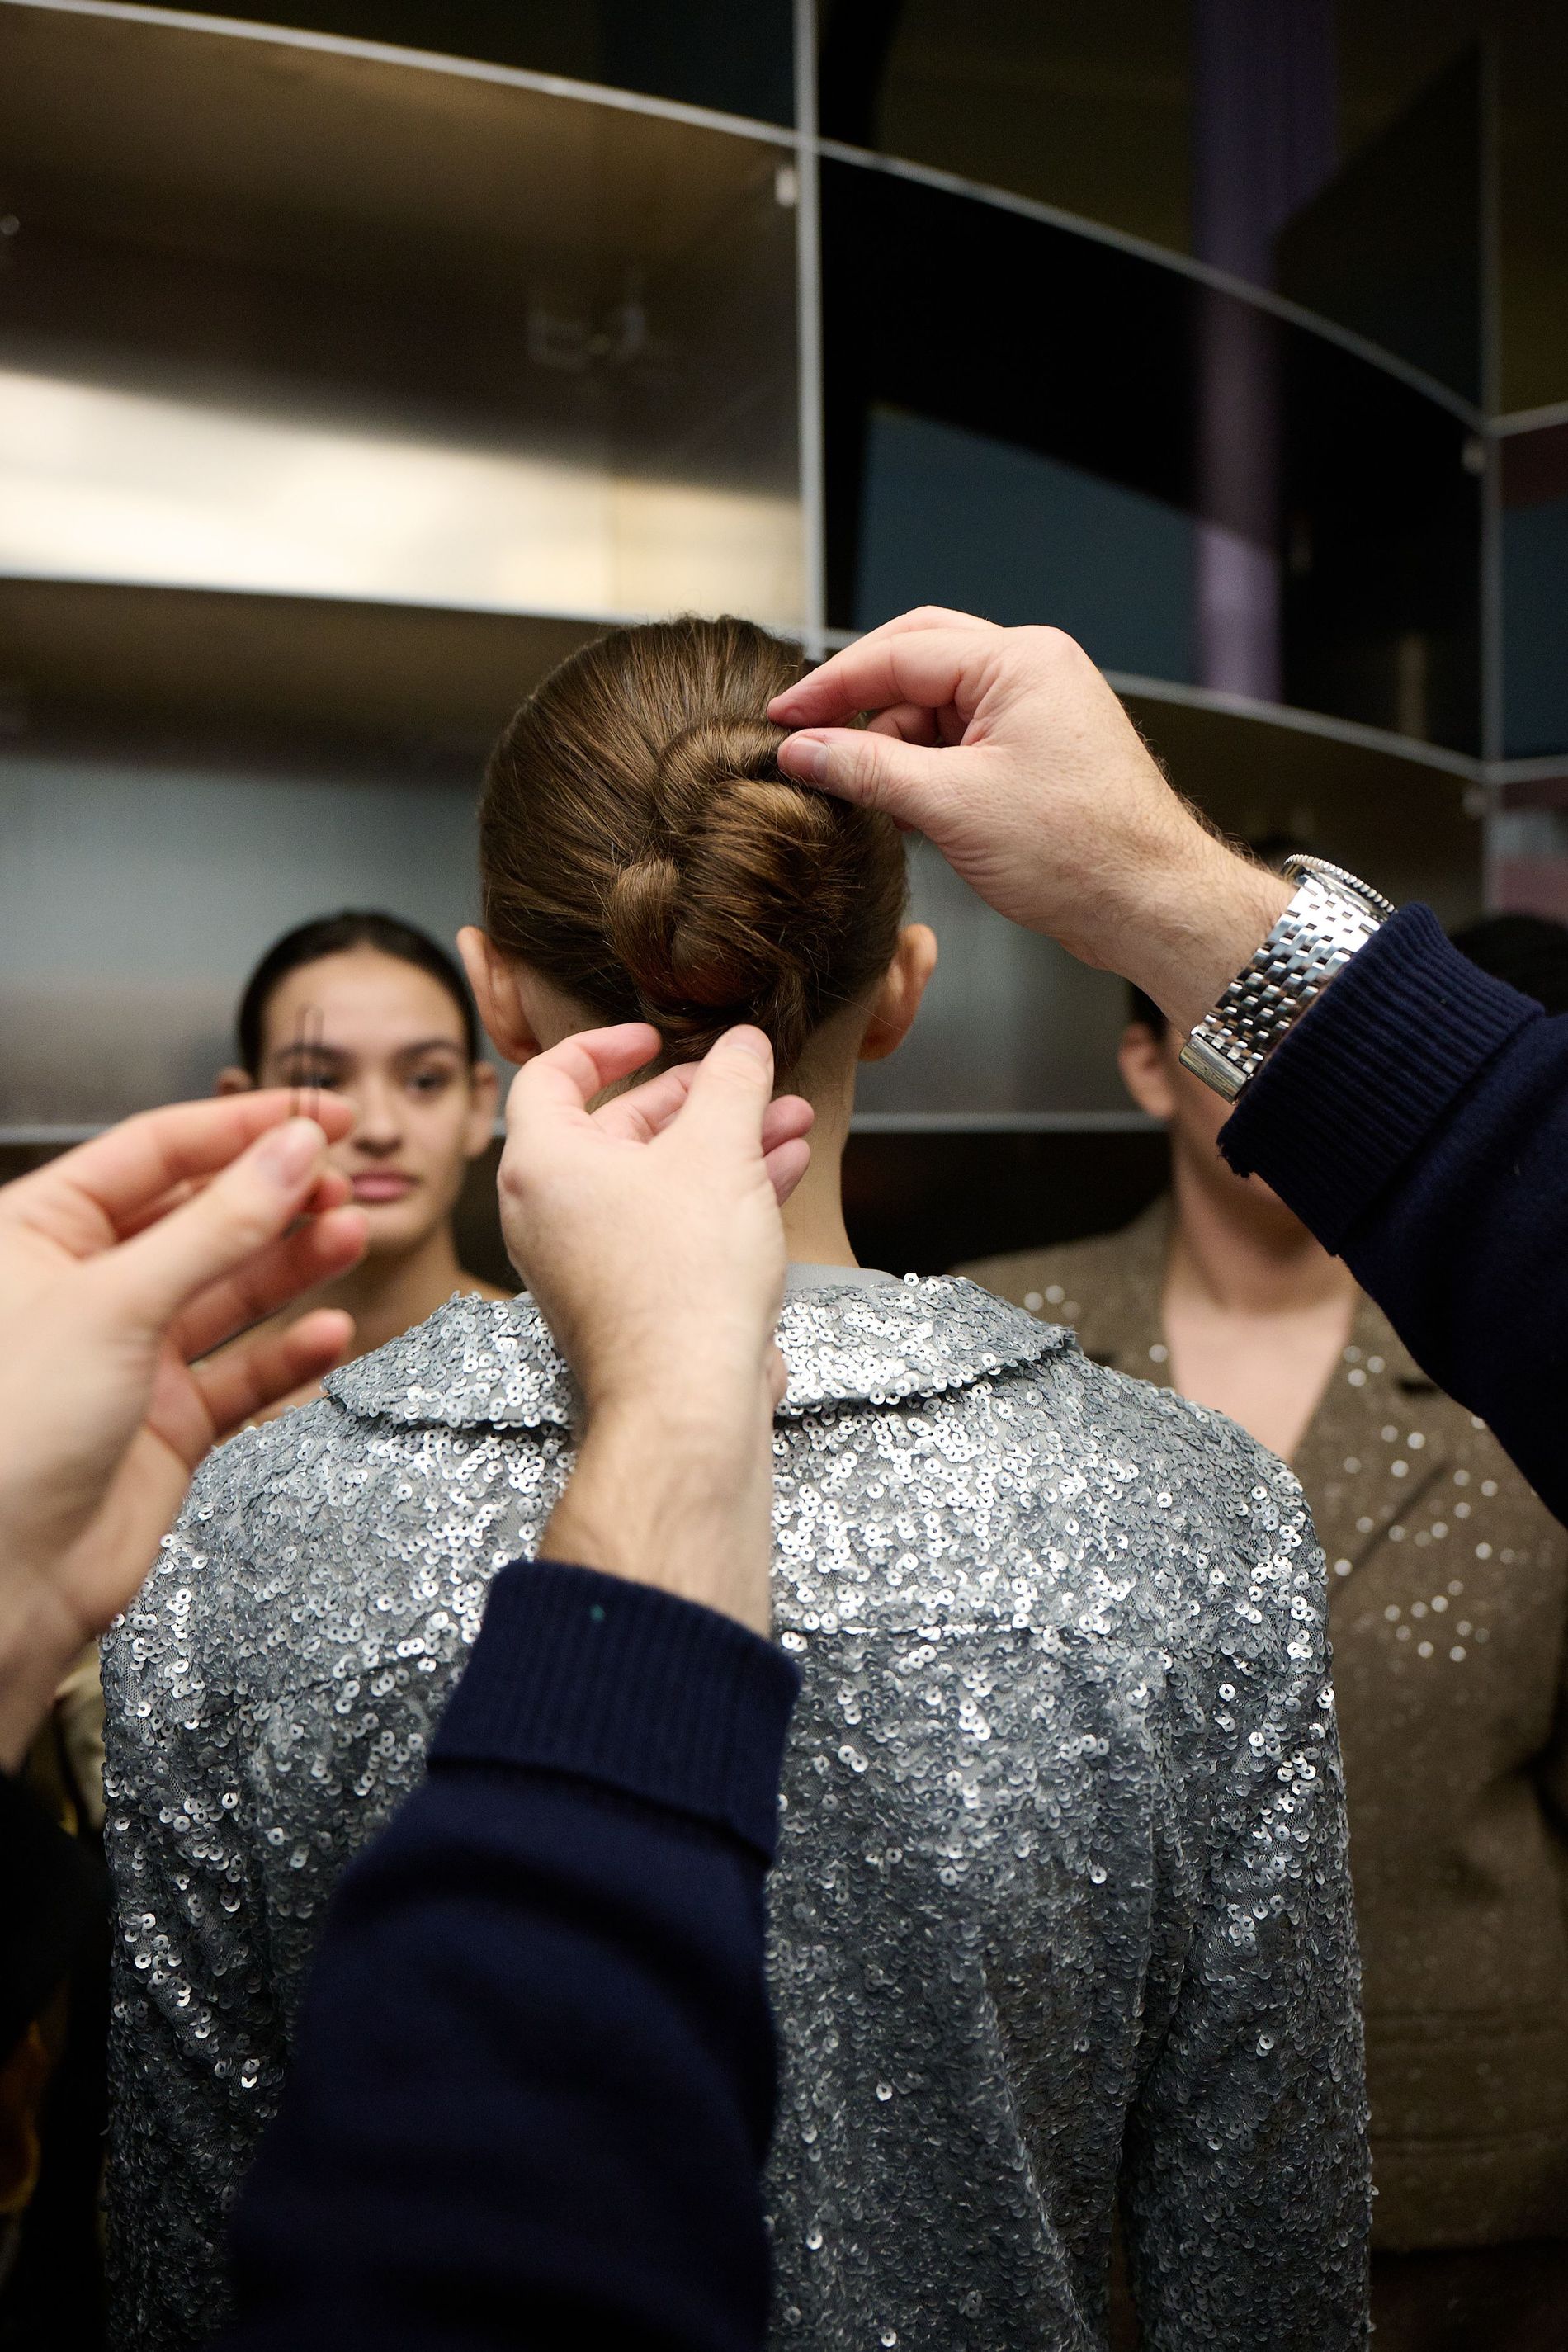 A model gets her hair pinned up in a bun backstage at Stine Goya's AW24 runway show Copenhagen Fashion Week 